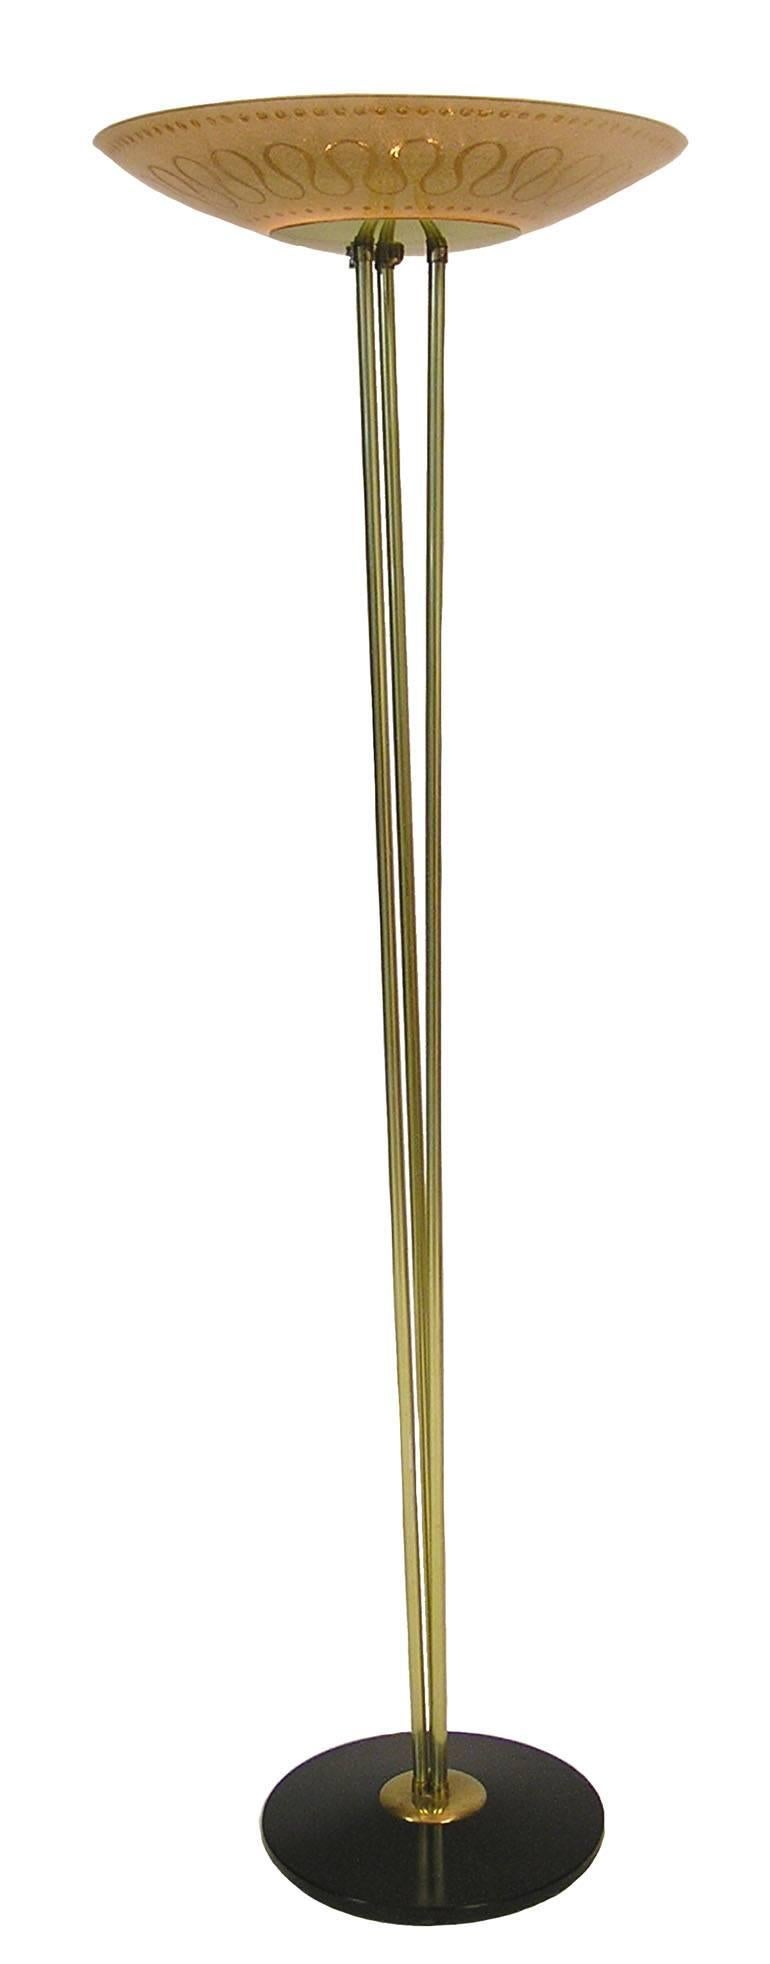 A stunning torchiere style floor lamp from the 1950s by Gaetano Sciolari for Stilnovo of Italy. Uniquely designed featuring a textured amber glass shade set on a slender three post brass stem and mounted on a coated black metal elliptical base.